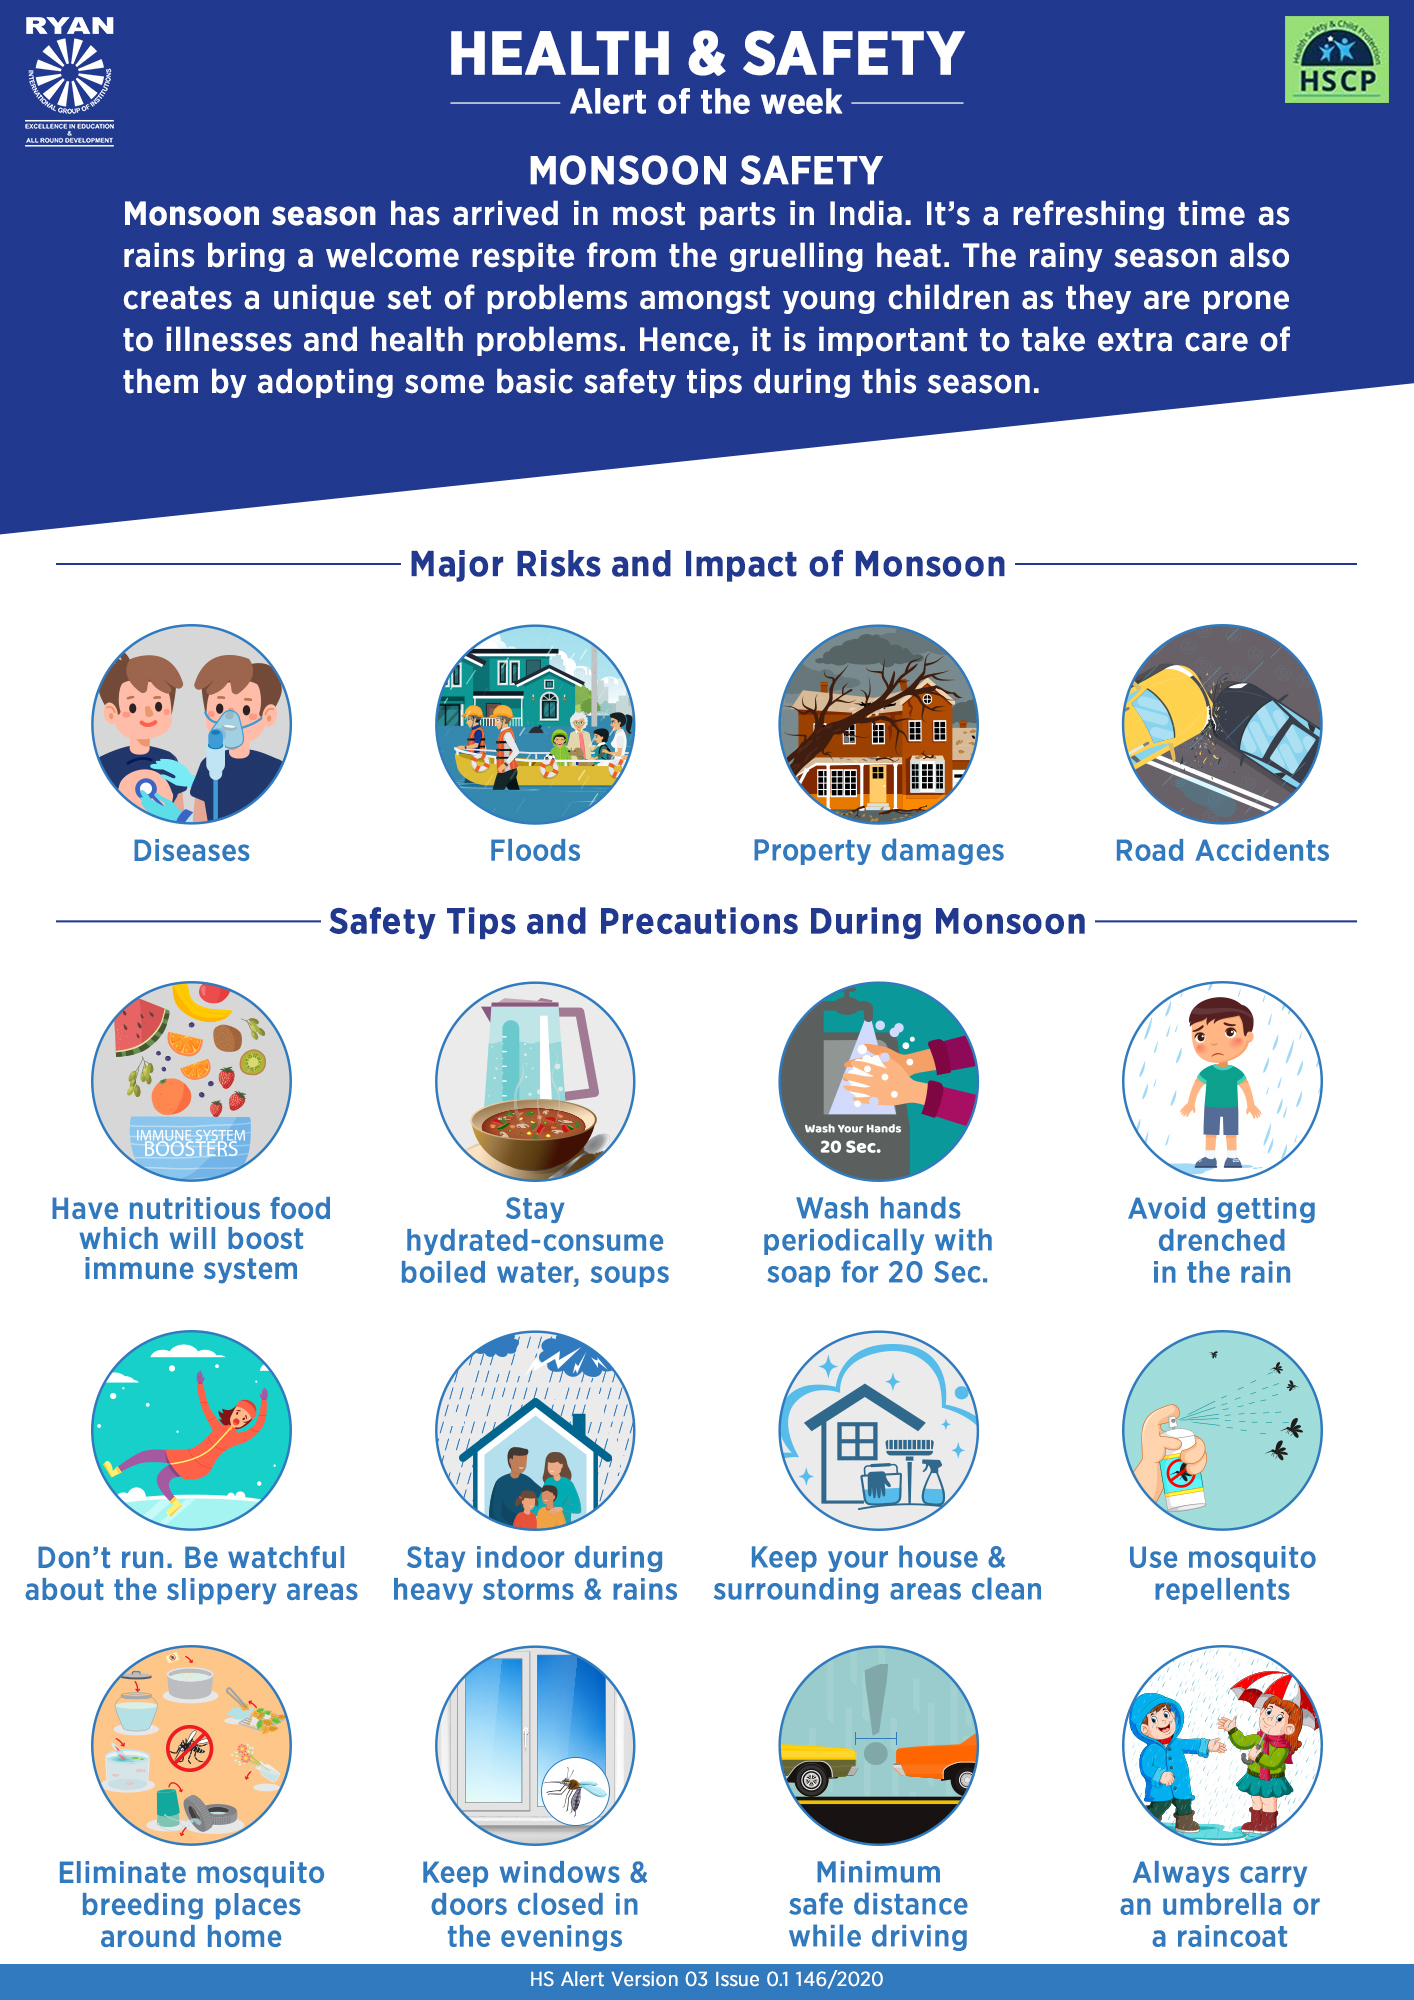 Tips To Avoid Getting Sick During The Monsoon Season In India [infographic] Ryan International